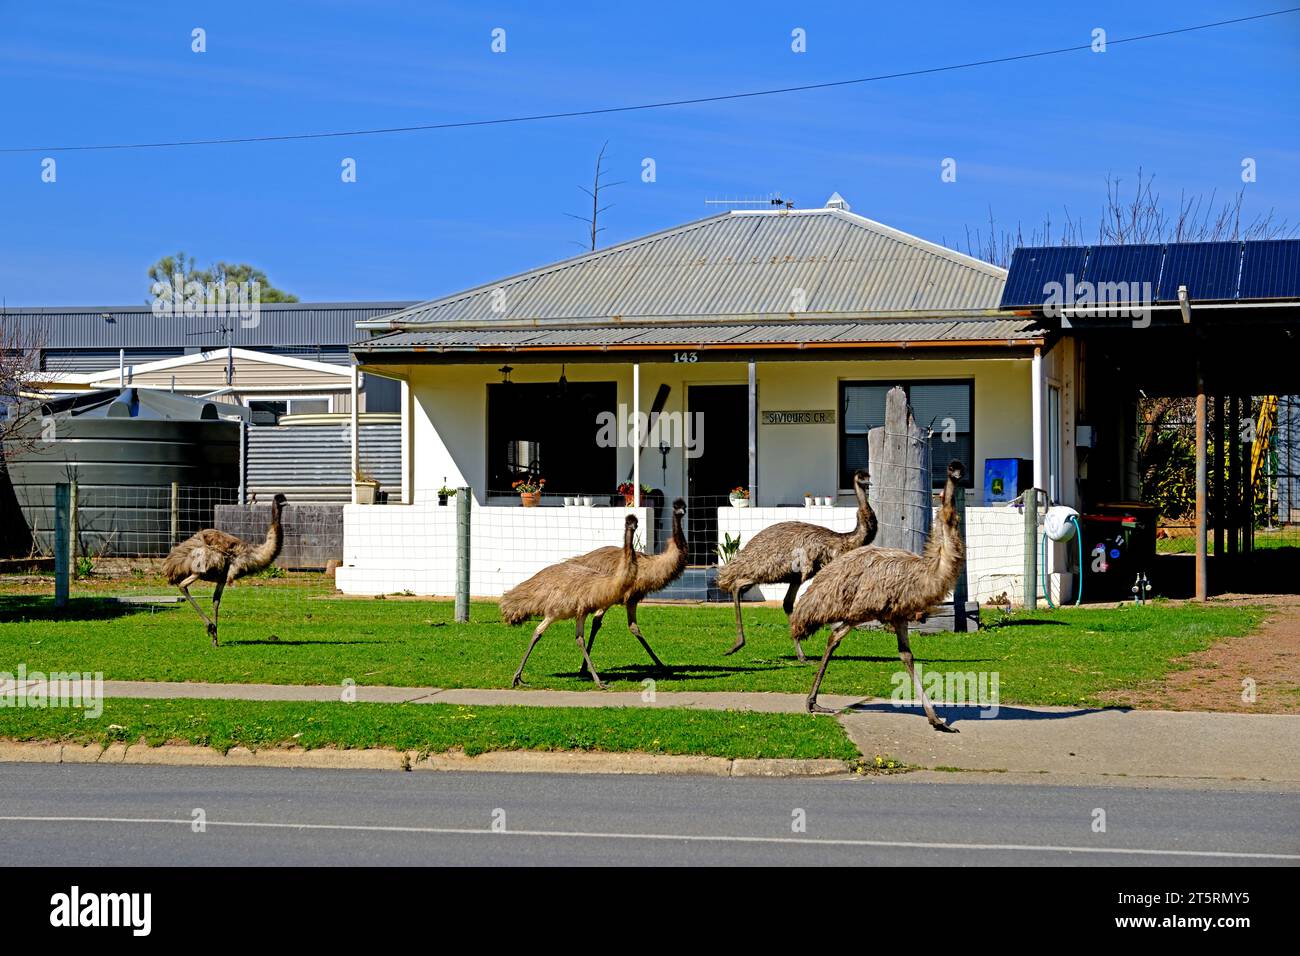 Emus walking along a street in Coffin Bay in the Eyre Peninsula region of South Australia Stock Photo